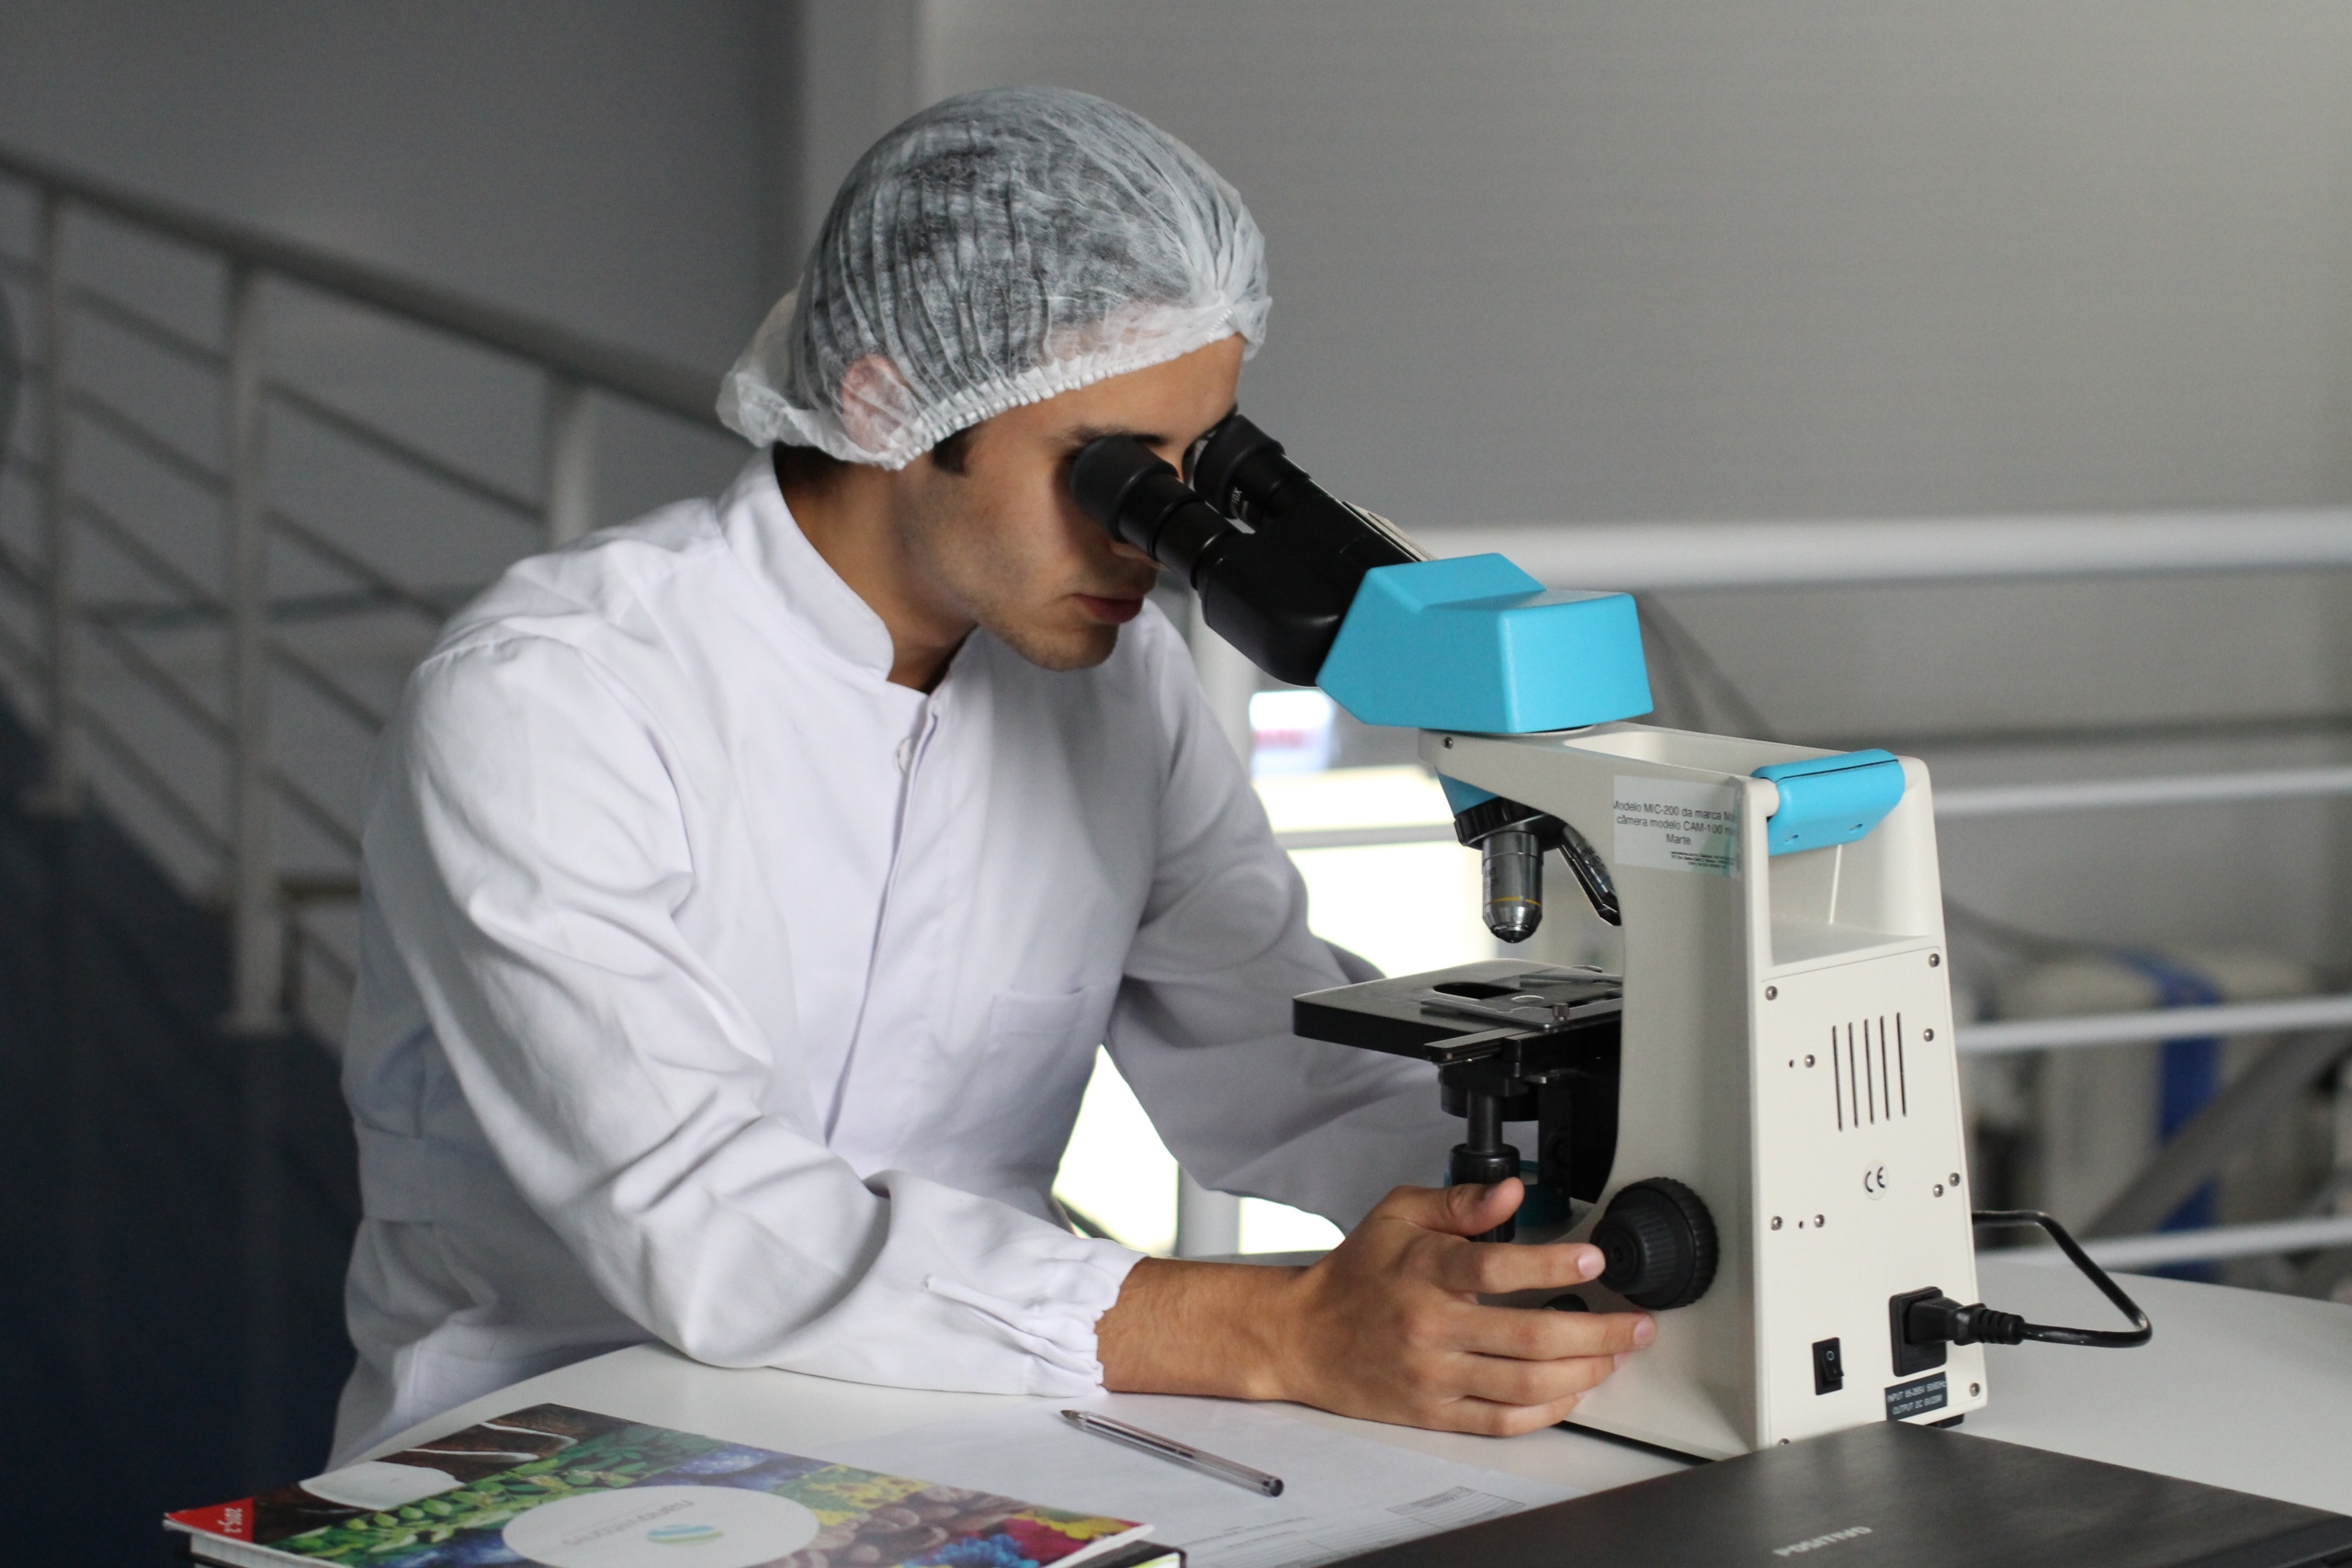 Researcher looking at a microscope